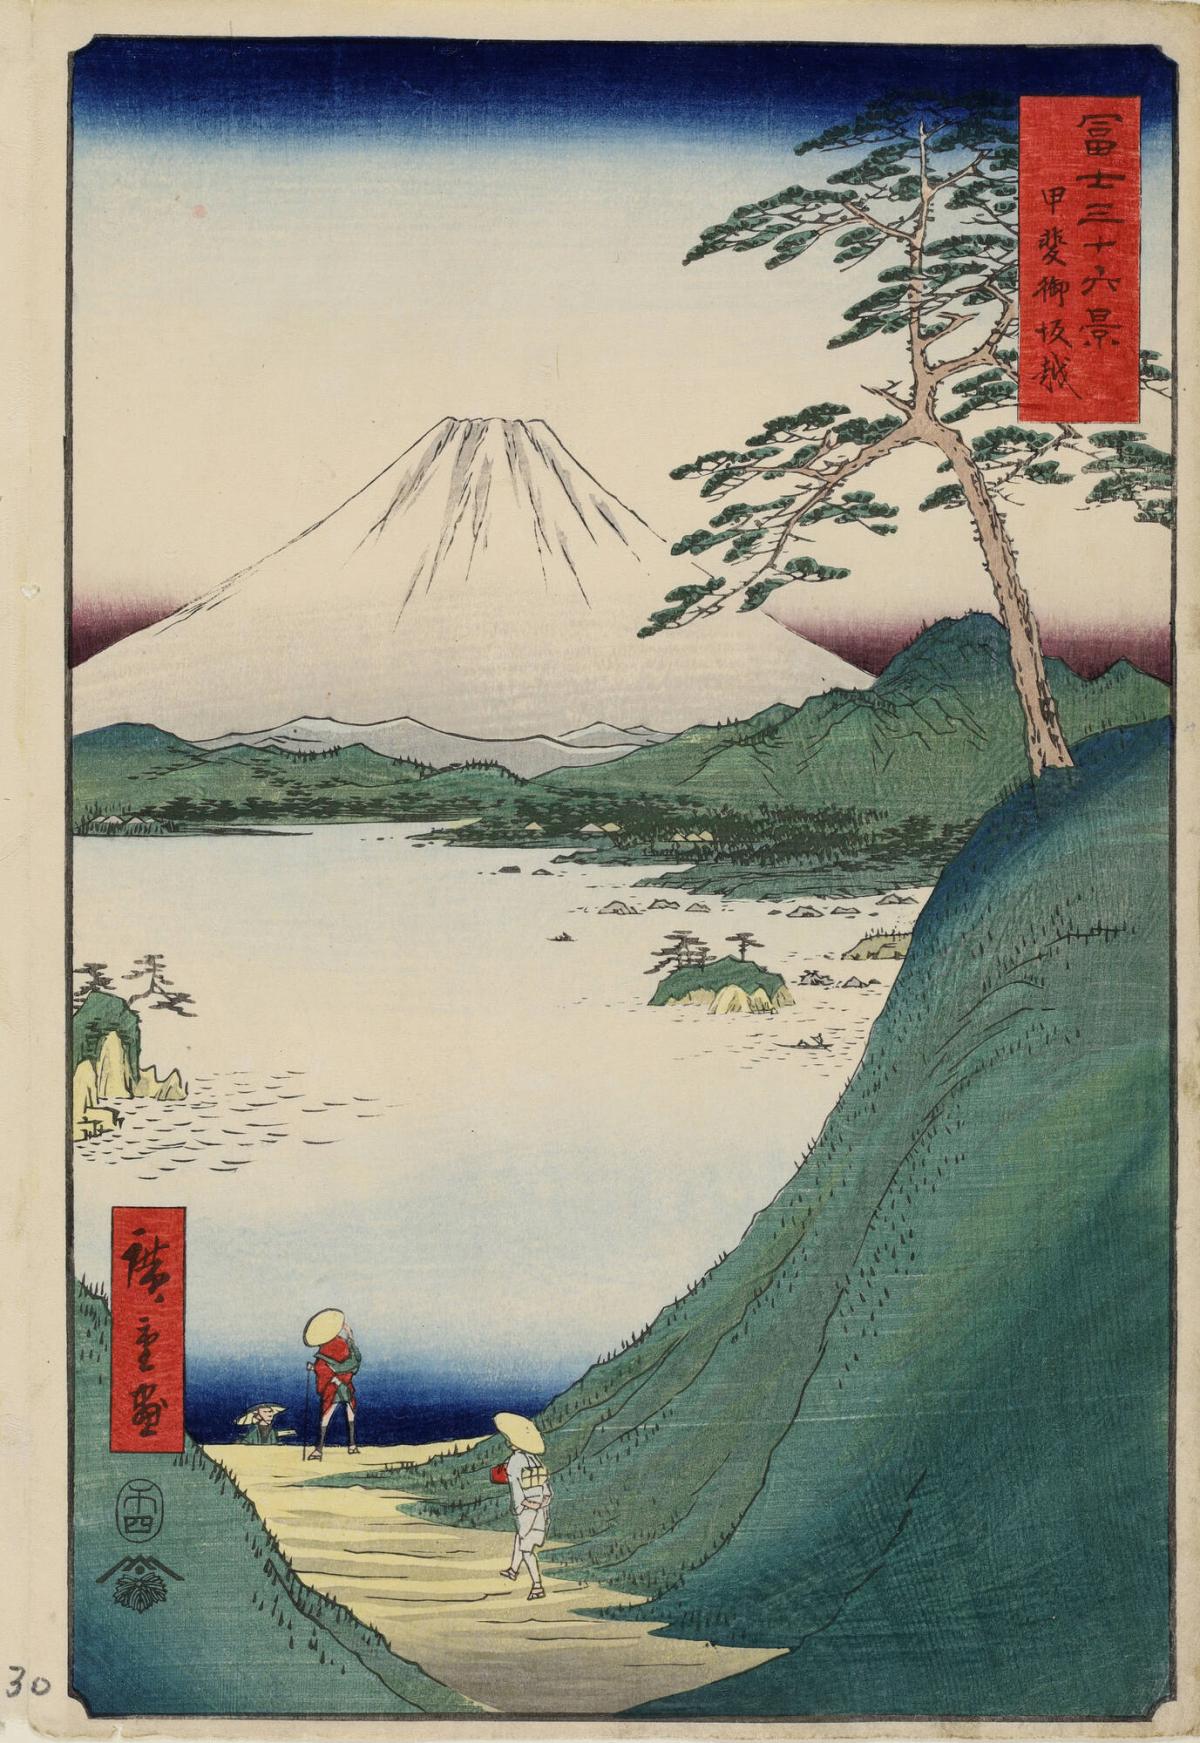 Misaka Pass in Kai Province, no. 30 from the series Thirty-six Views of Mt. Fuji